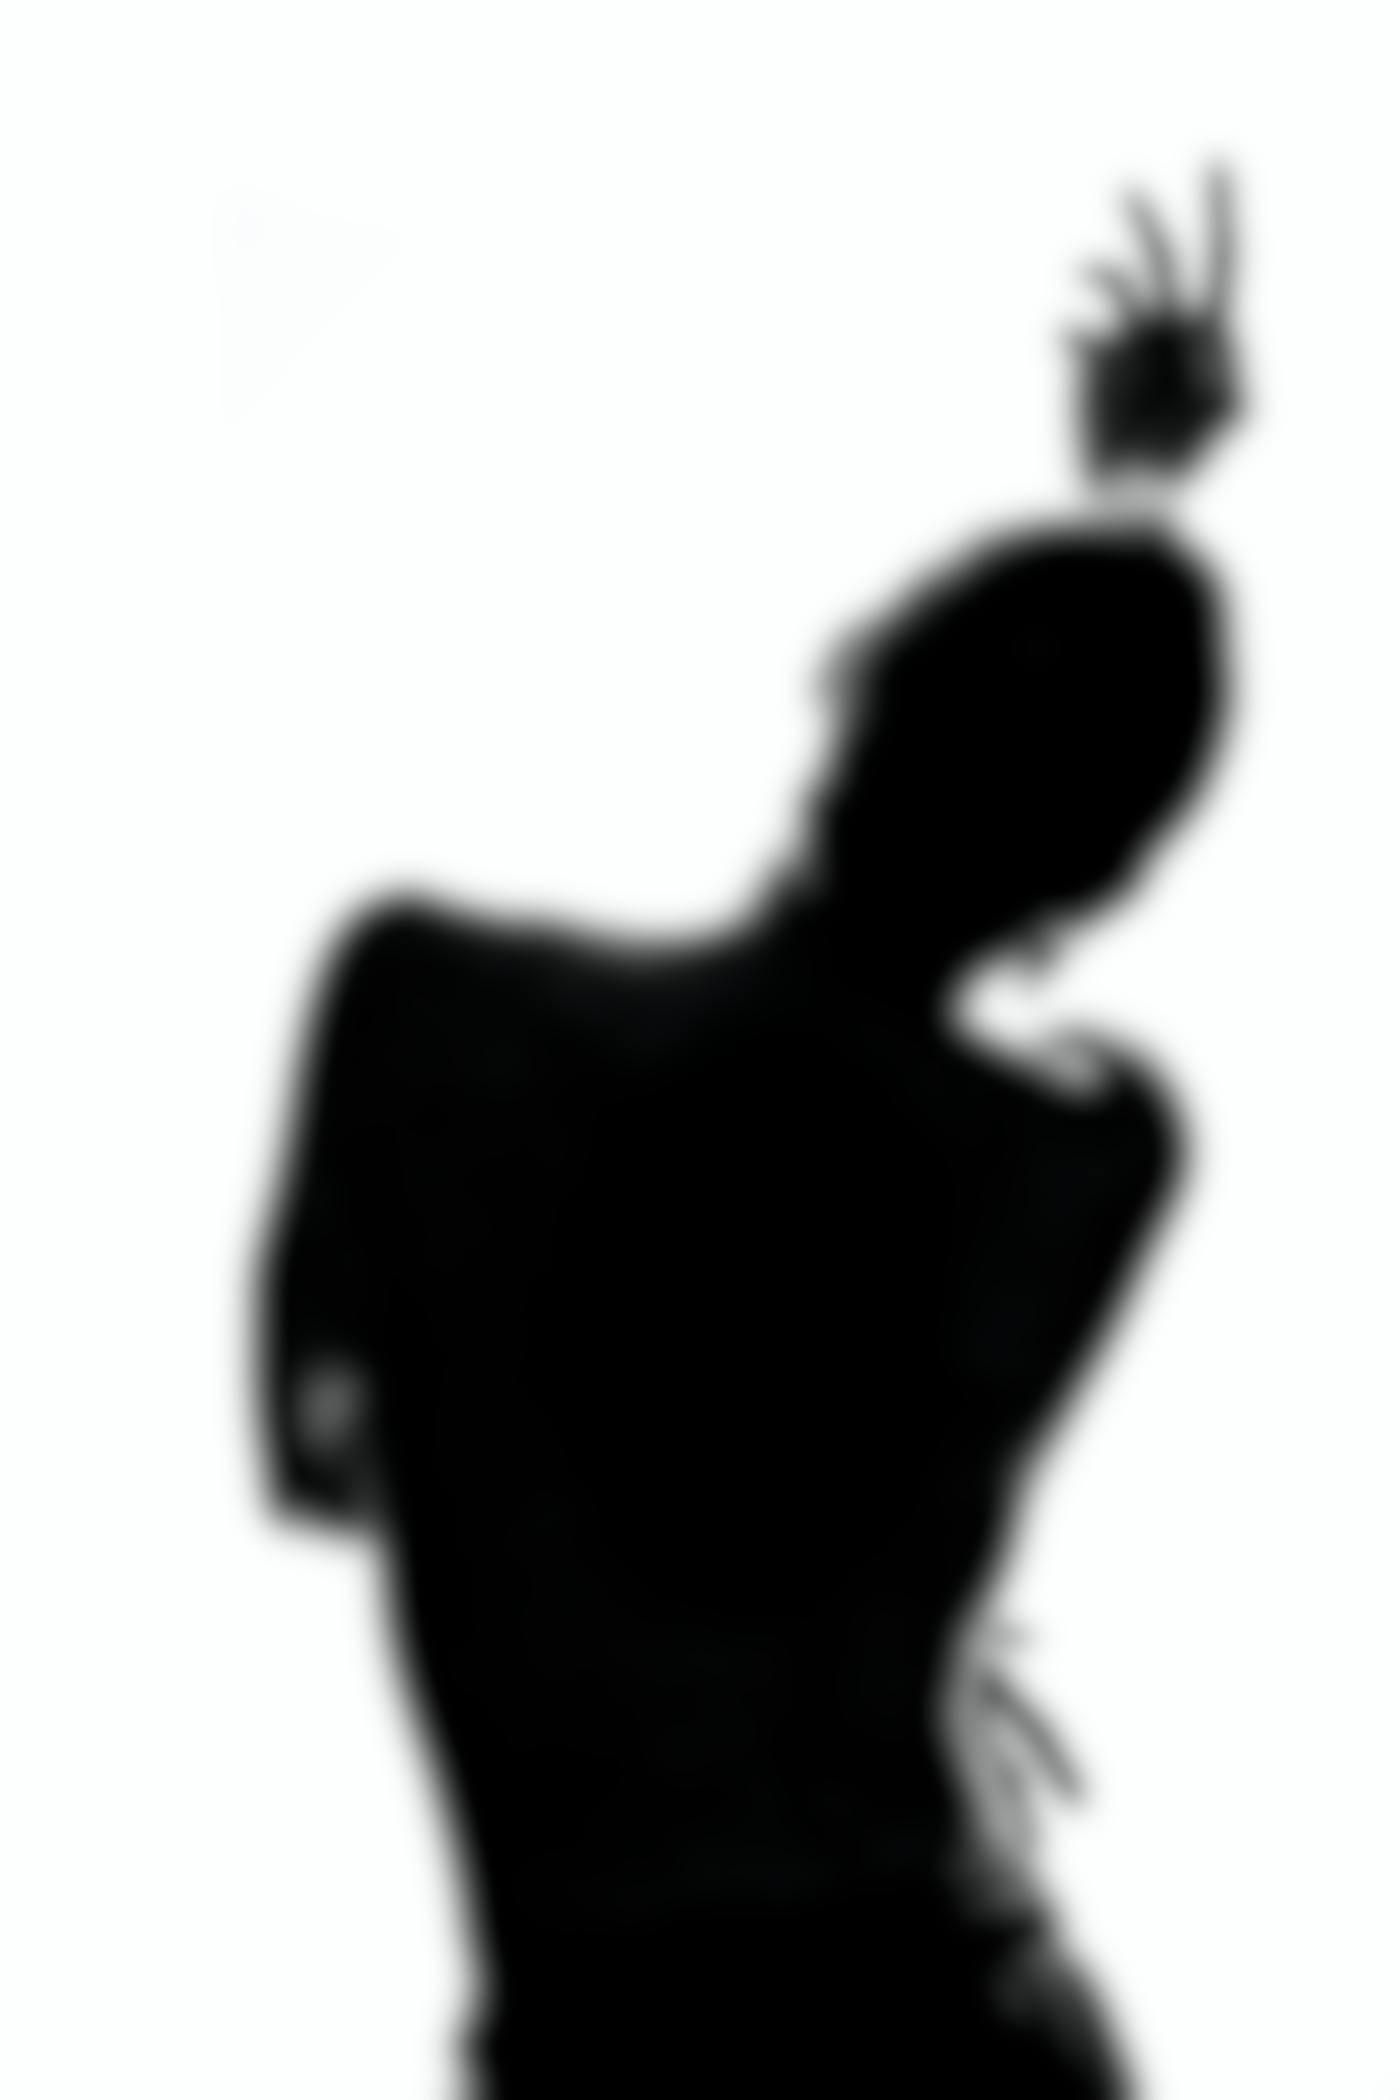 A silhouette of a person dancing